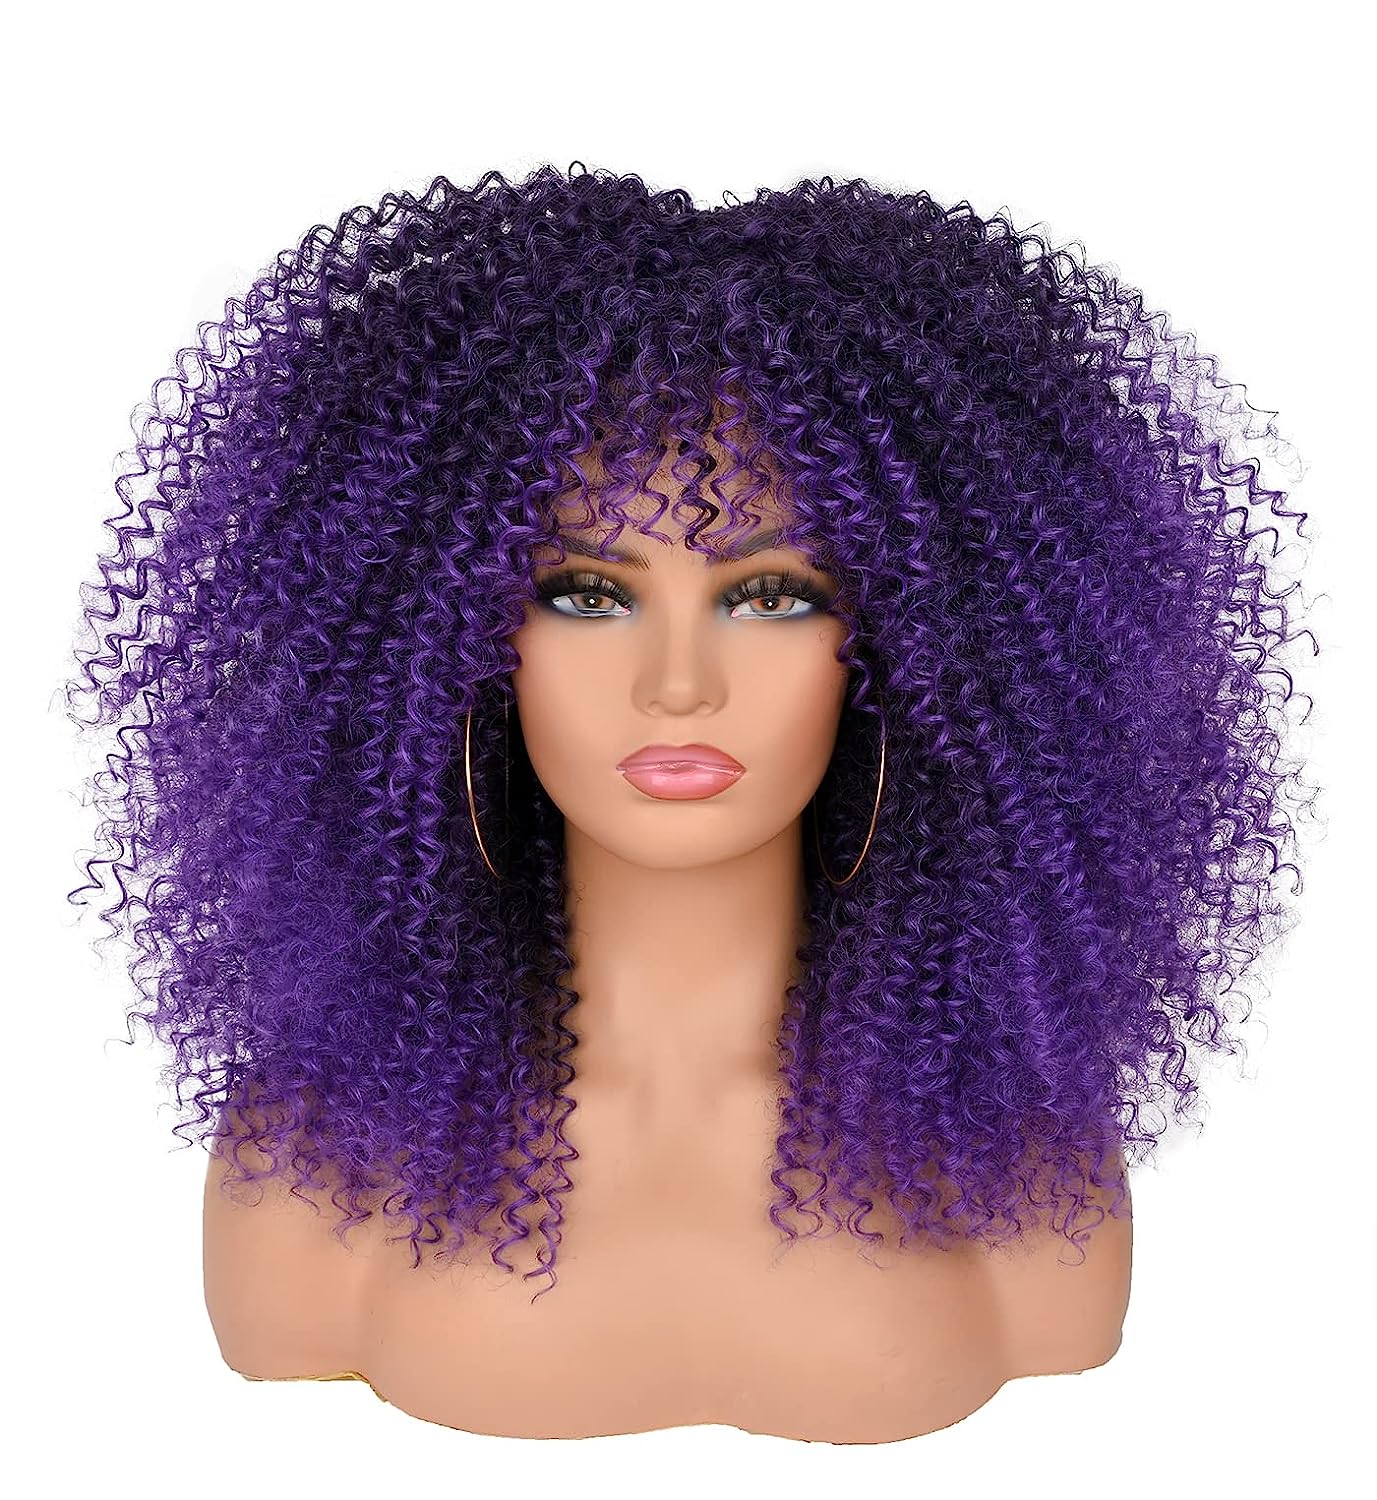 Black Ombre Purple hair wig with bangs 